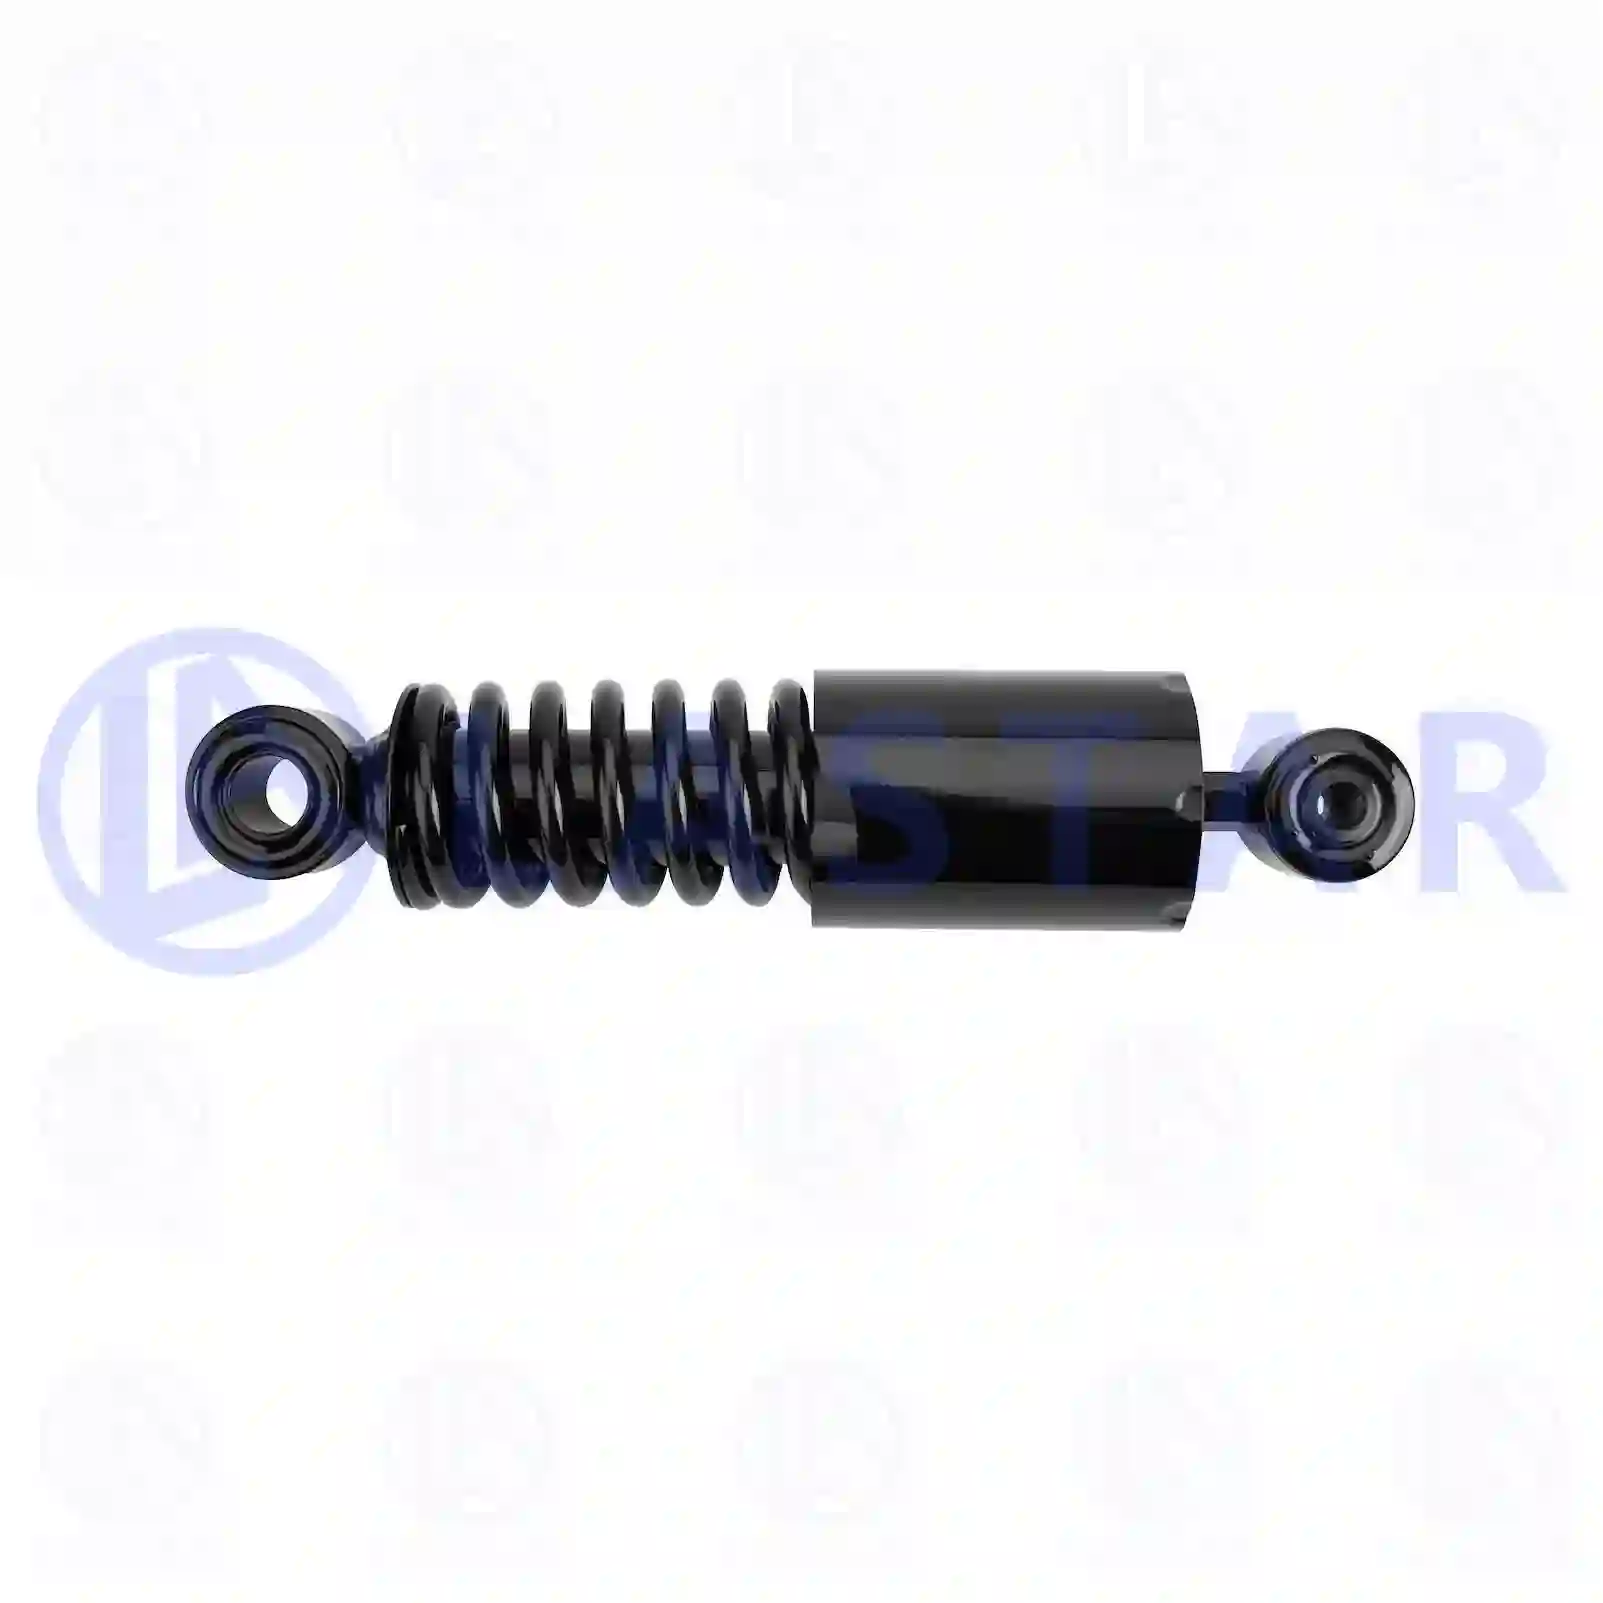 Cabin shock absorber, 77734865, 9428904919 ||  77734865 Lastar Spare Part | Truck Spare Parts, Auotomotive Spare Parts Cabin shock absorber, 77734865, 9428904919 ||  77734865 Lastar Spare Part | Truck Spare Parts, Auotomotive Spare Parts